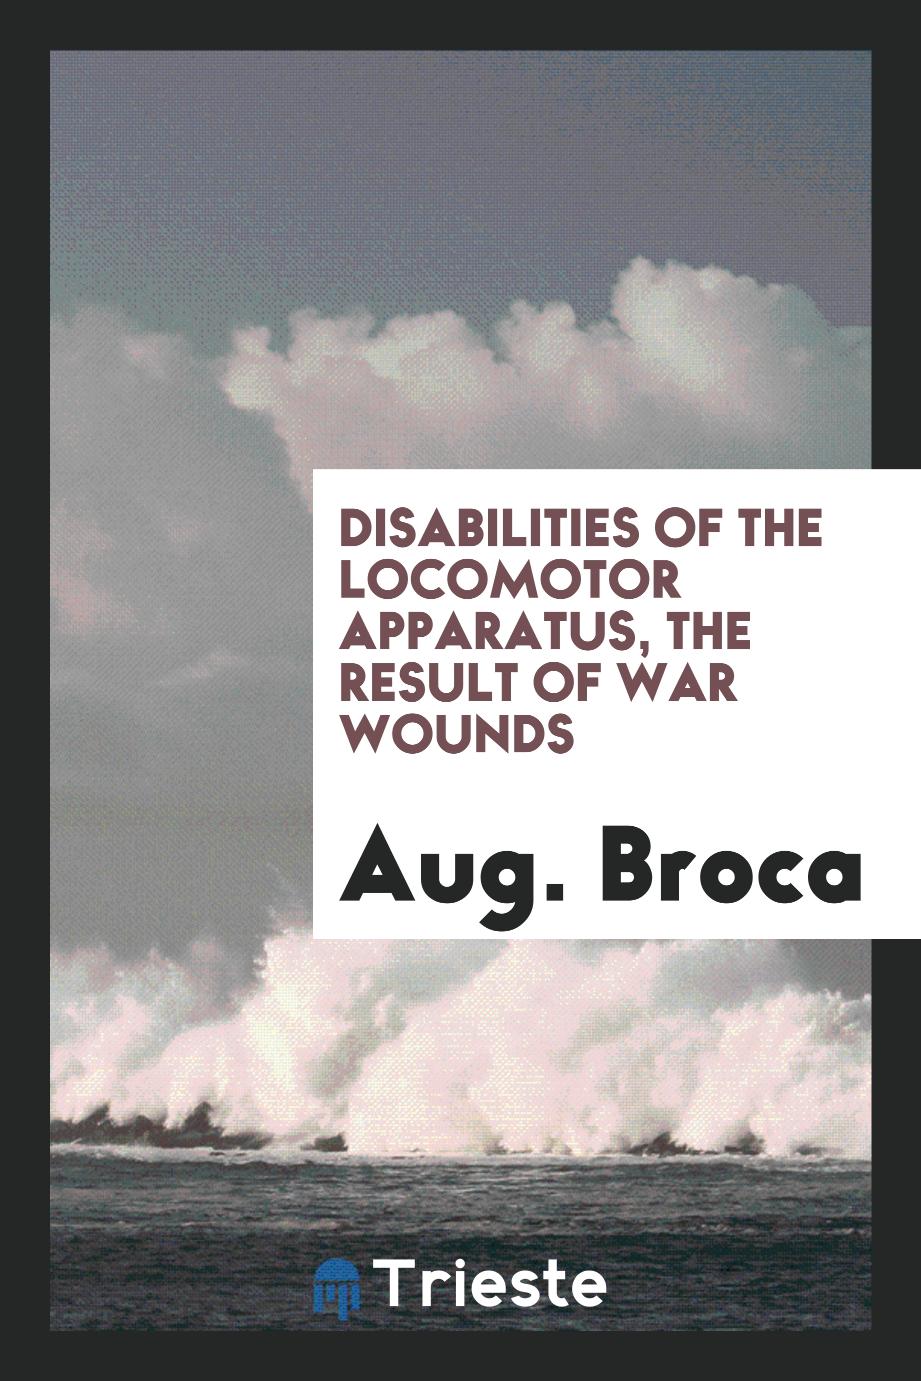 Disabilities of the locomotor apparatus, the result of war wounds